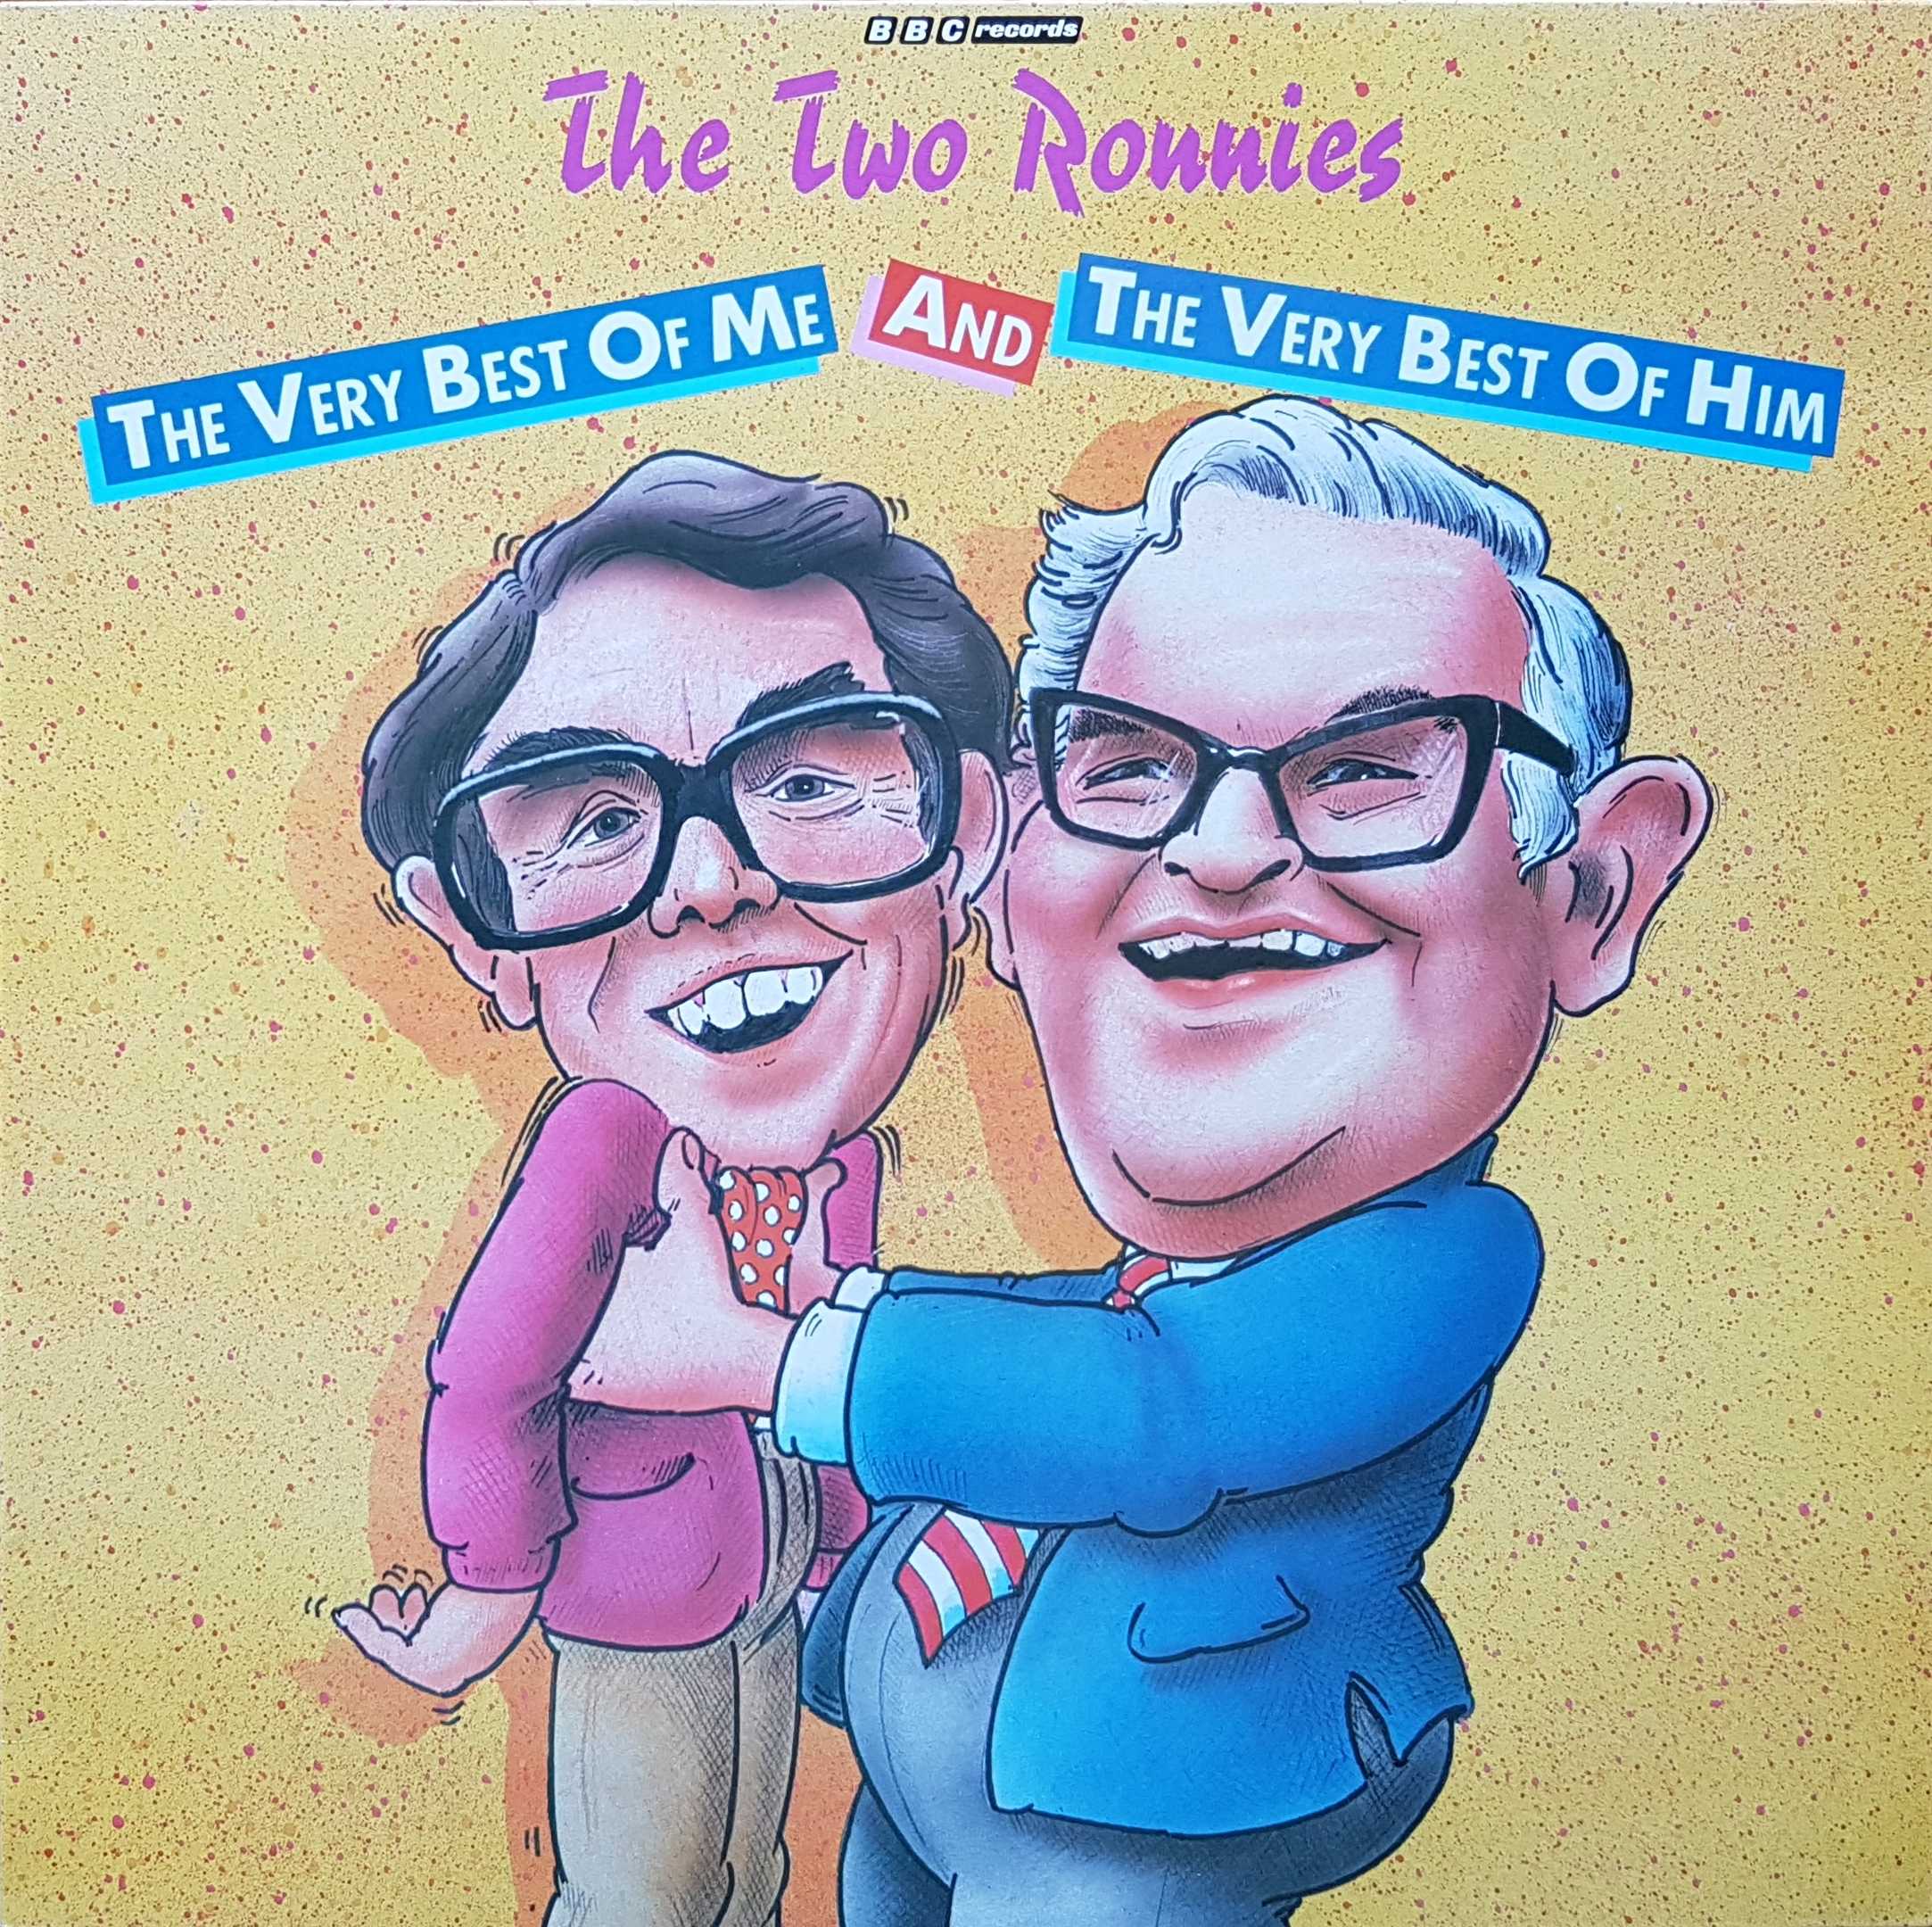 Picture of REC 514 The very best of me and the very best of him (The two Ronnies) by artist Ronnie Corbett / Ronnie Barker from the BBC albums - Records and Tapes library